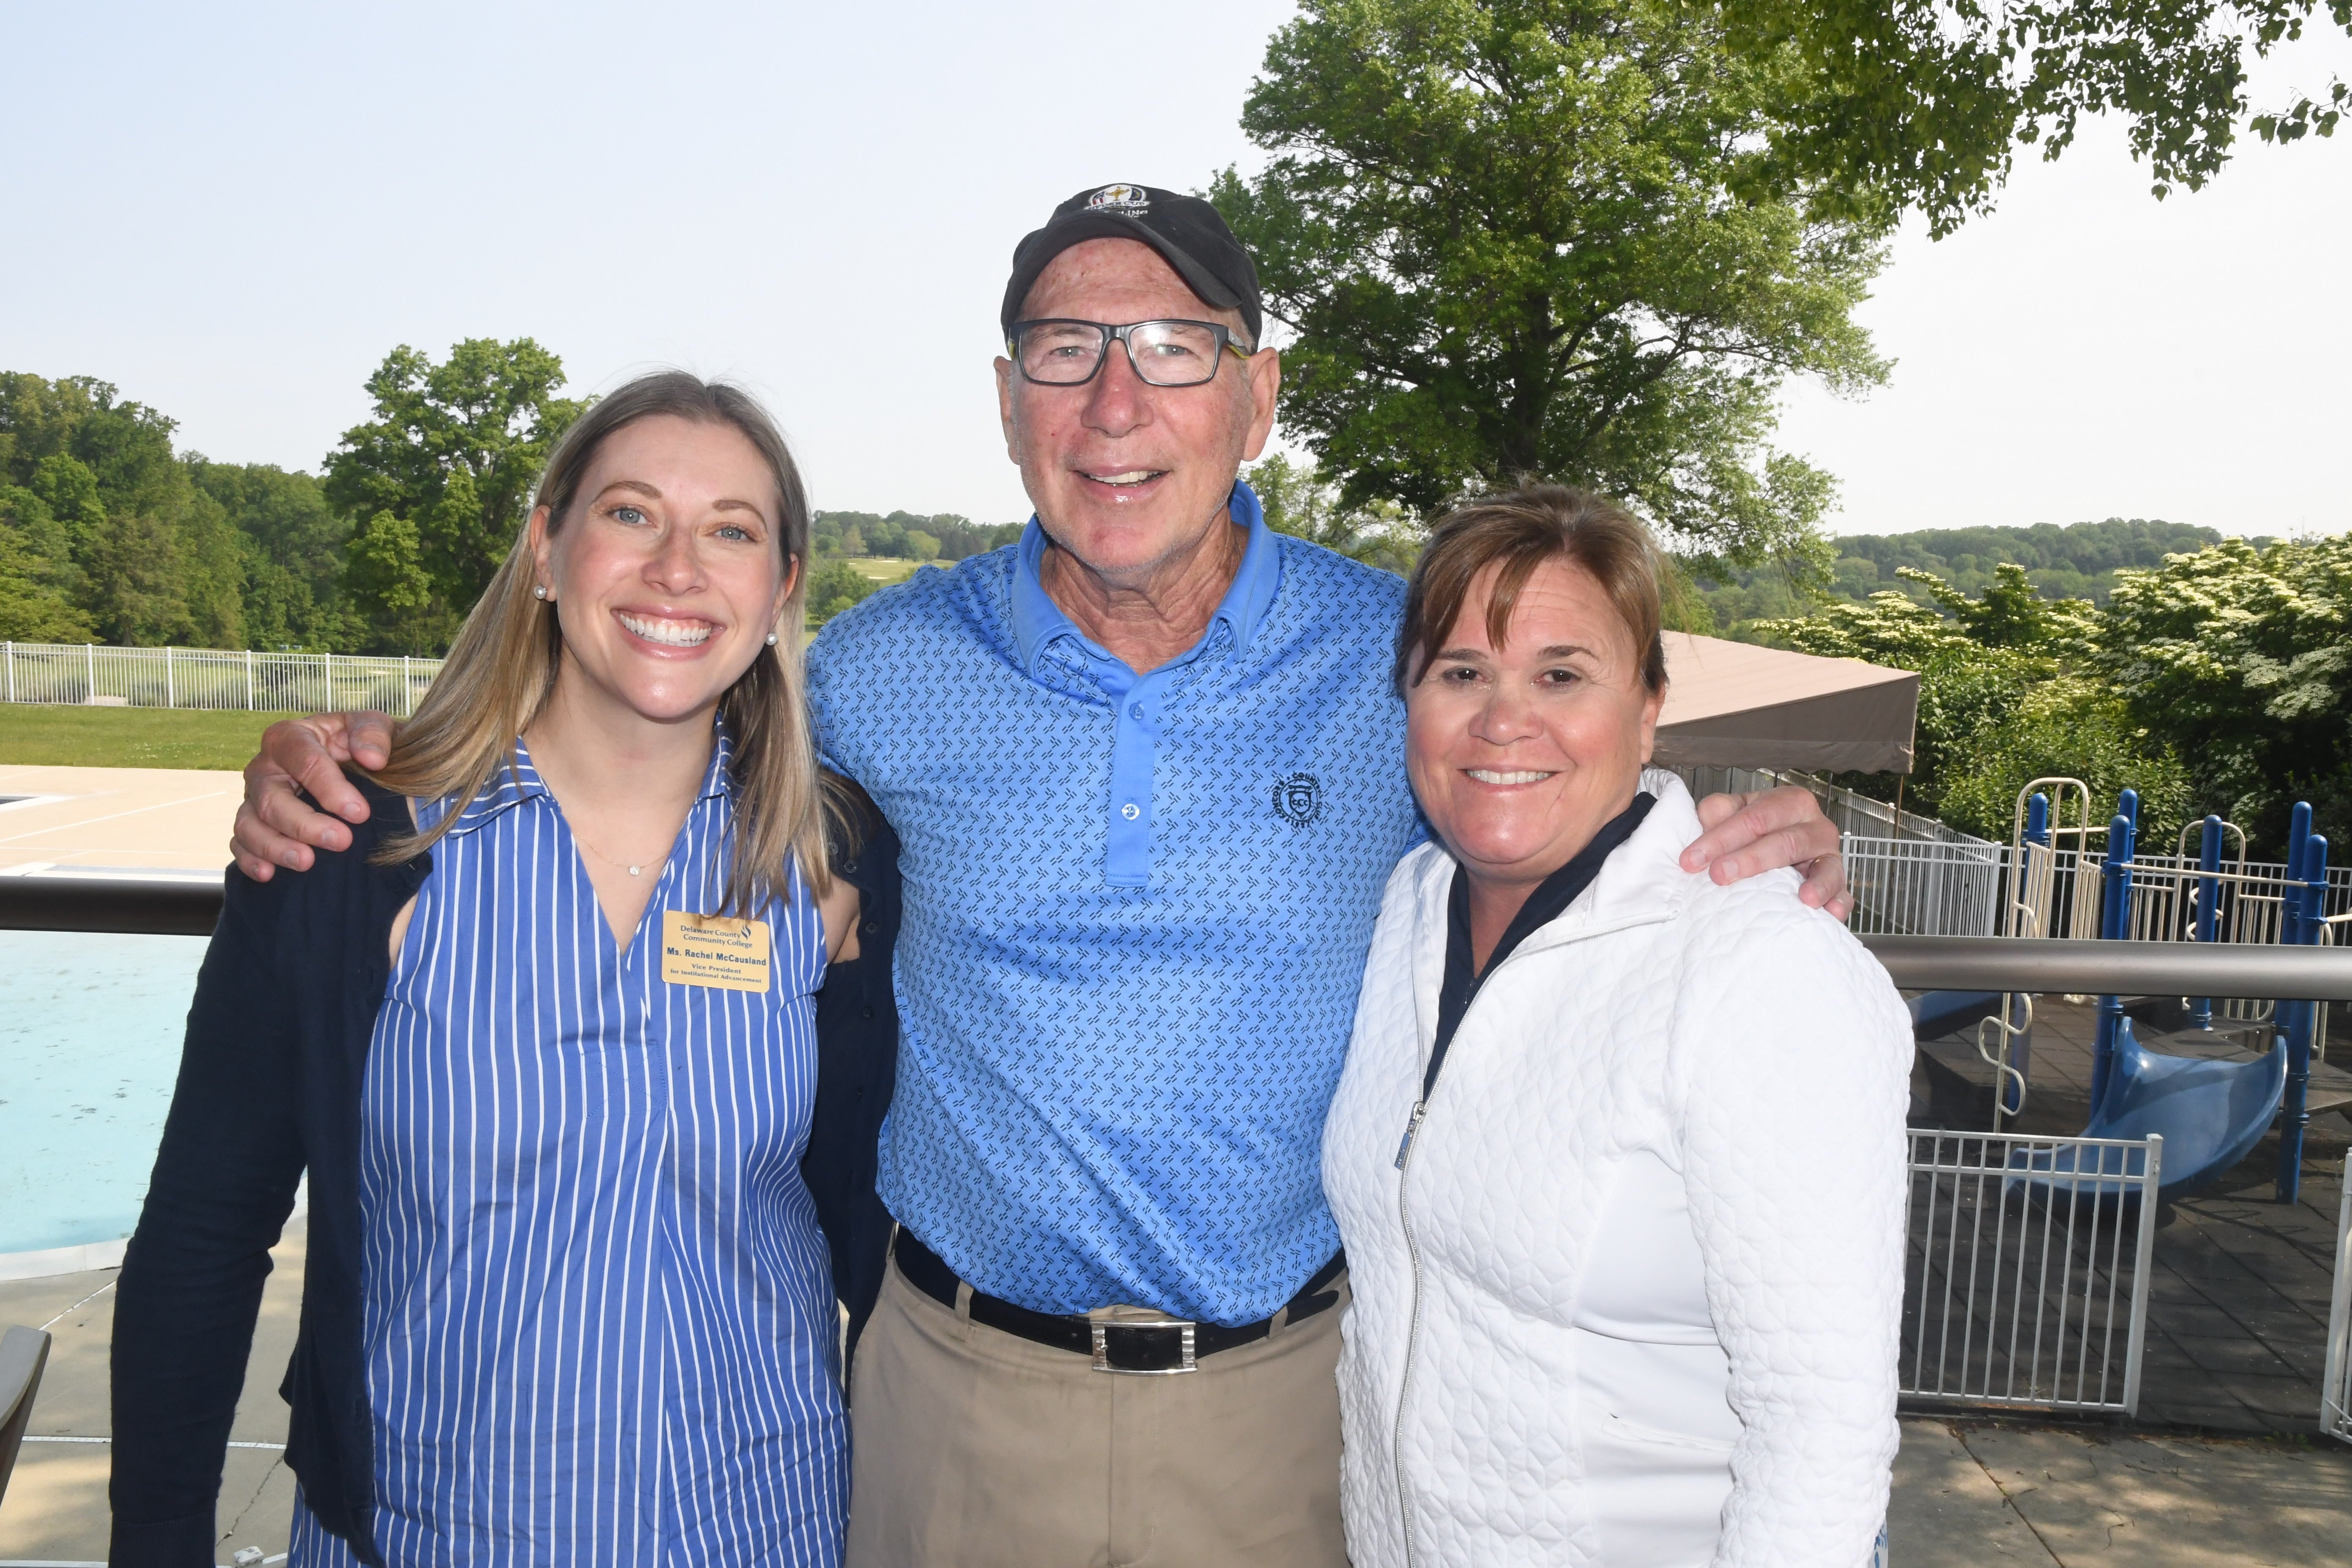 Delaware County Community College Educational Foundation Executive Director Rachel McCausland with Andy and Sharon Kelleher of the Kelleher Connect Opportunity Fund, at the 2023 annual Golf Classic